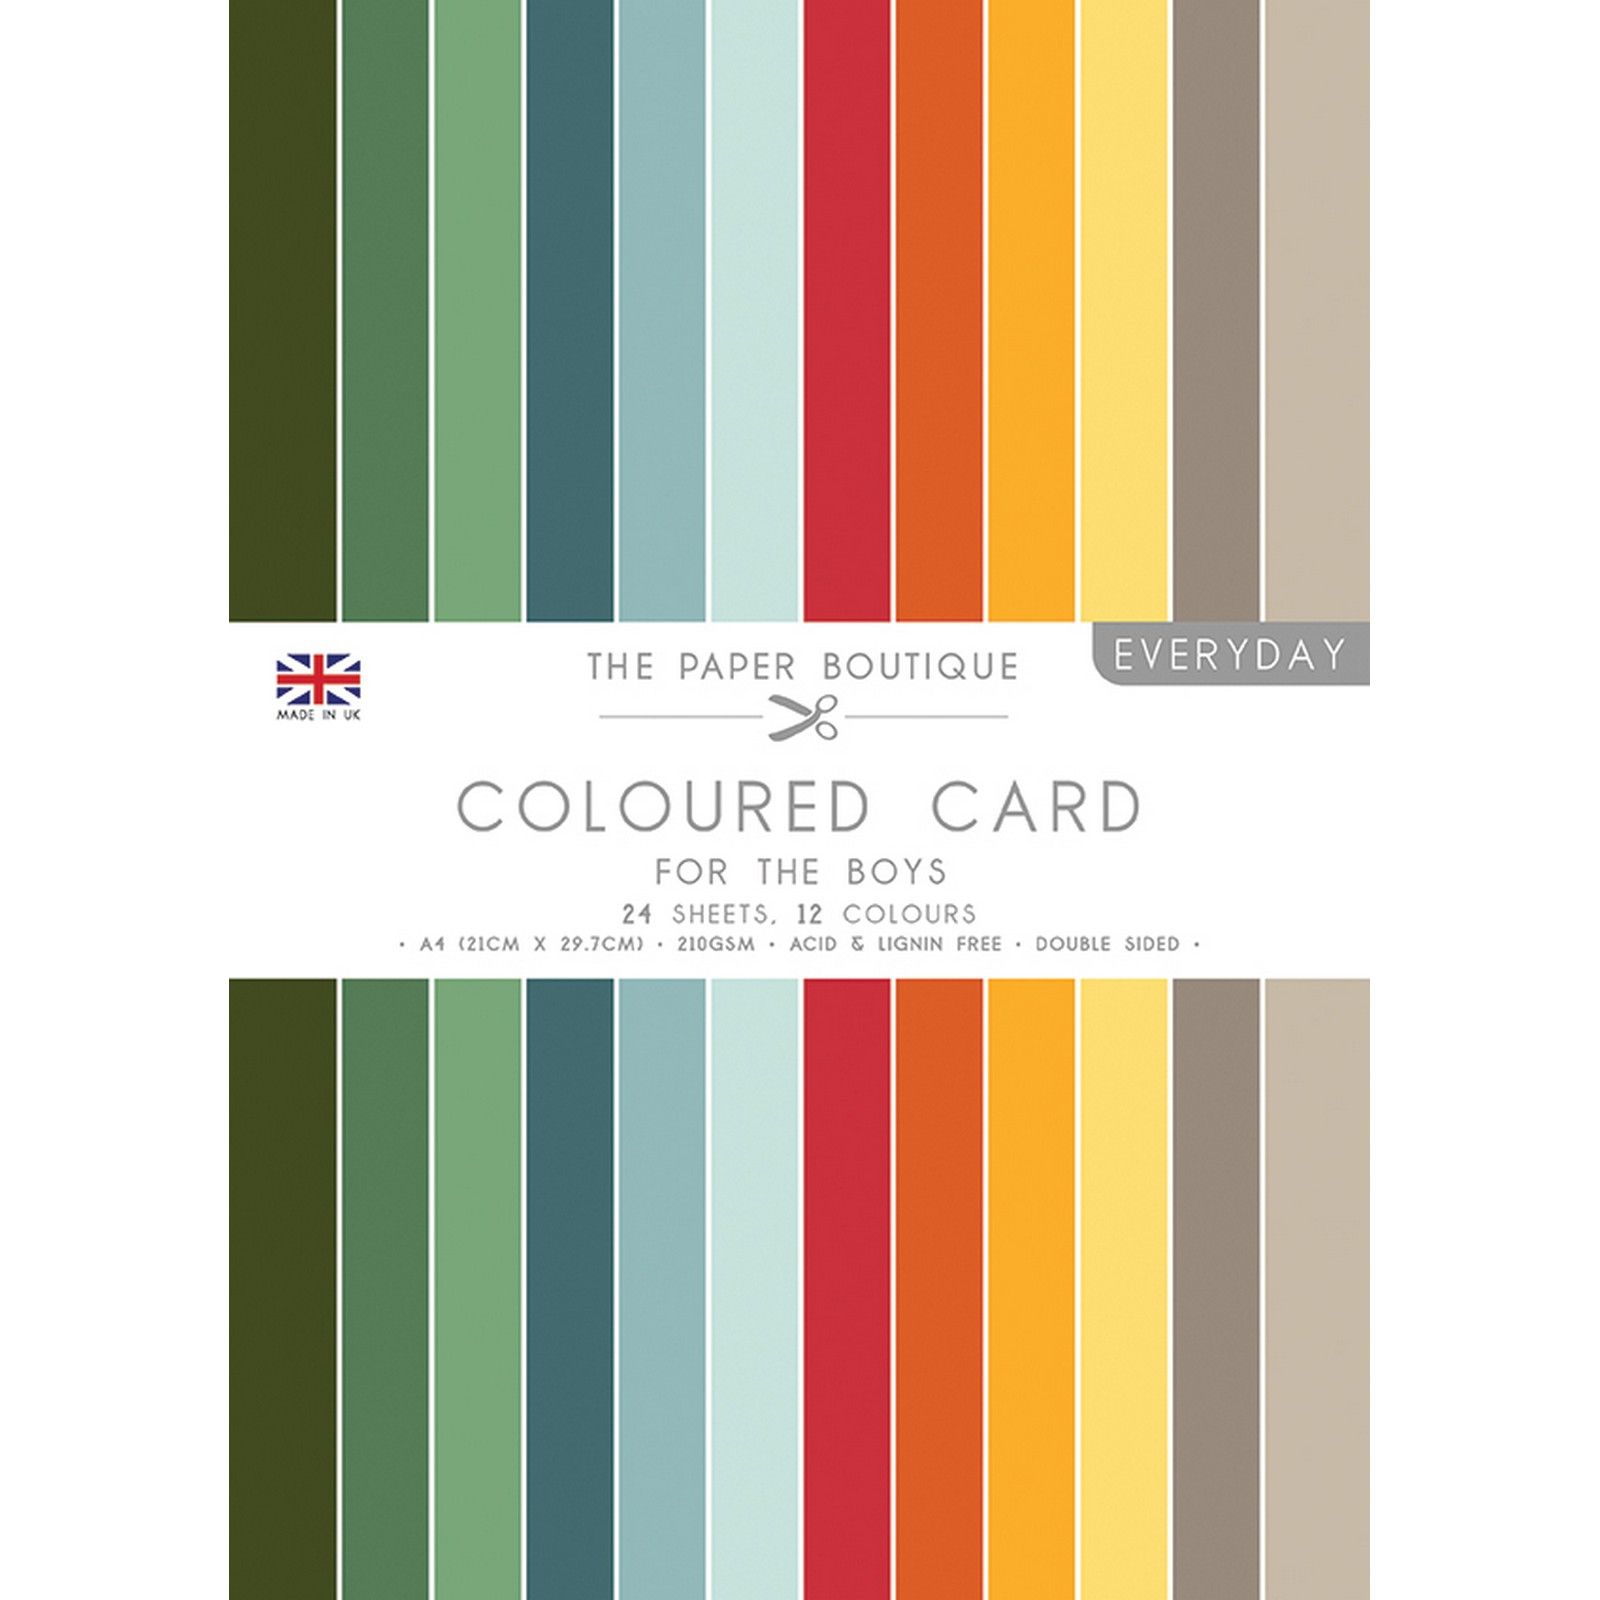 The Paper Boutique • Everyday for the boys coloured card